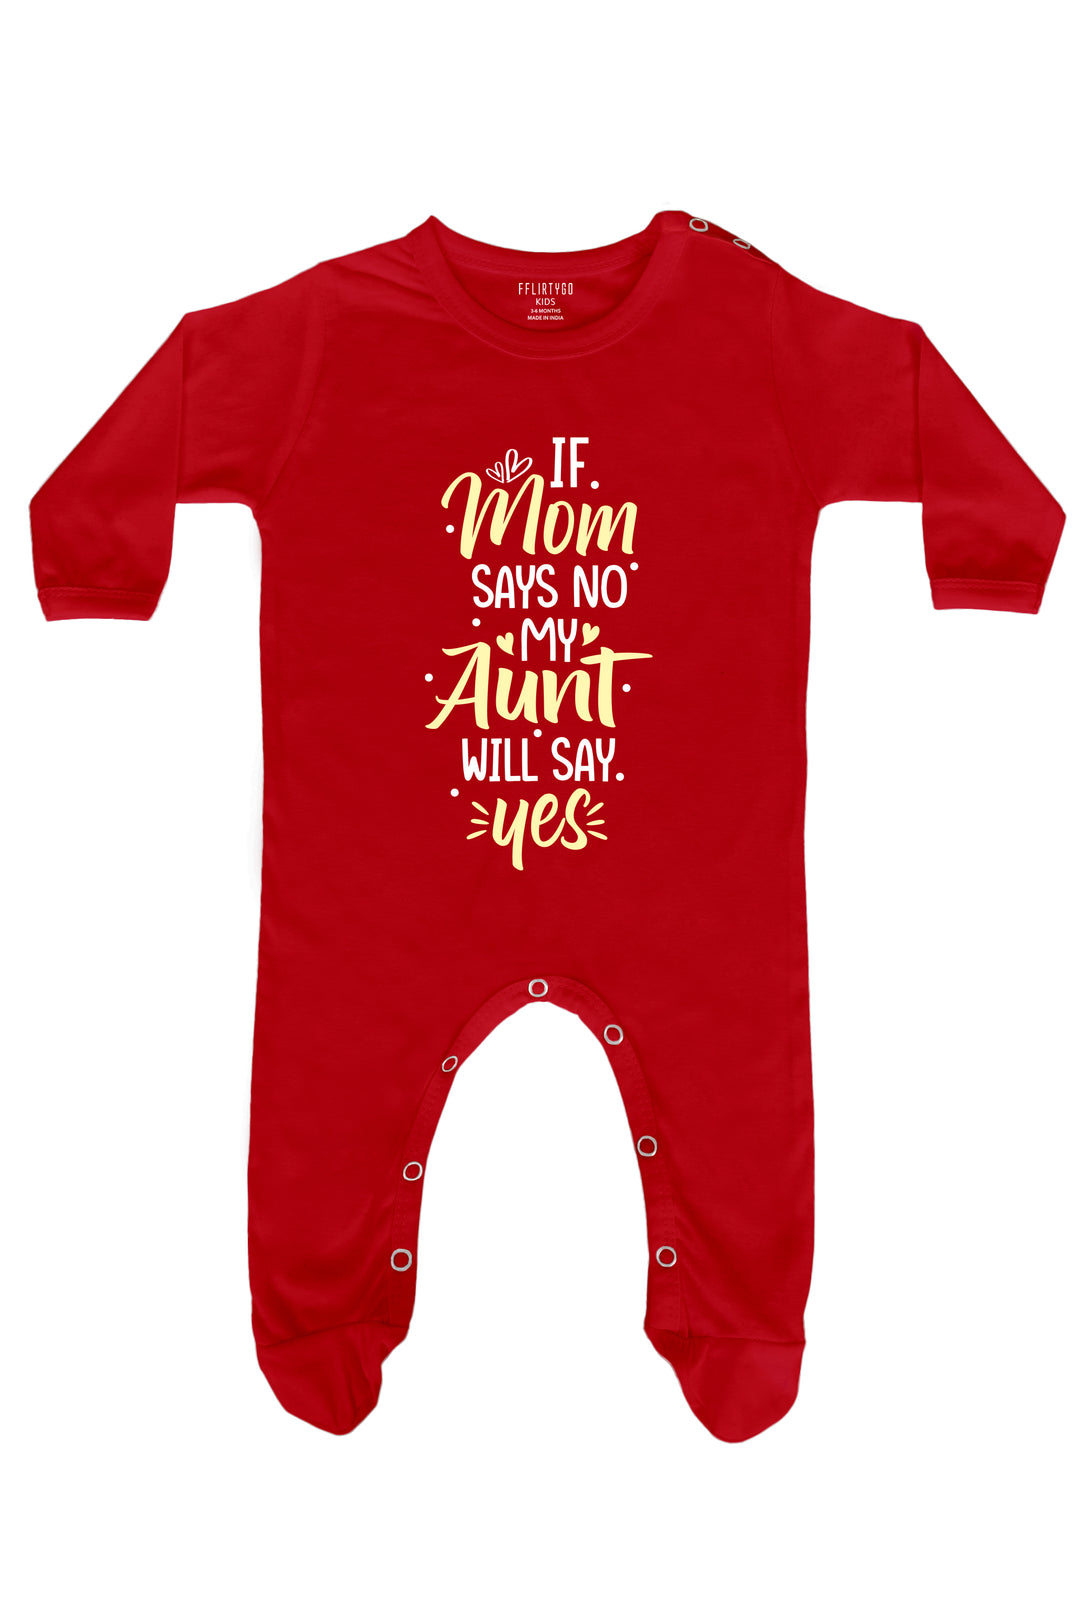 If Mom Says No My Aunt Will Say Yes Baby Romper | Onesies